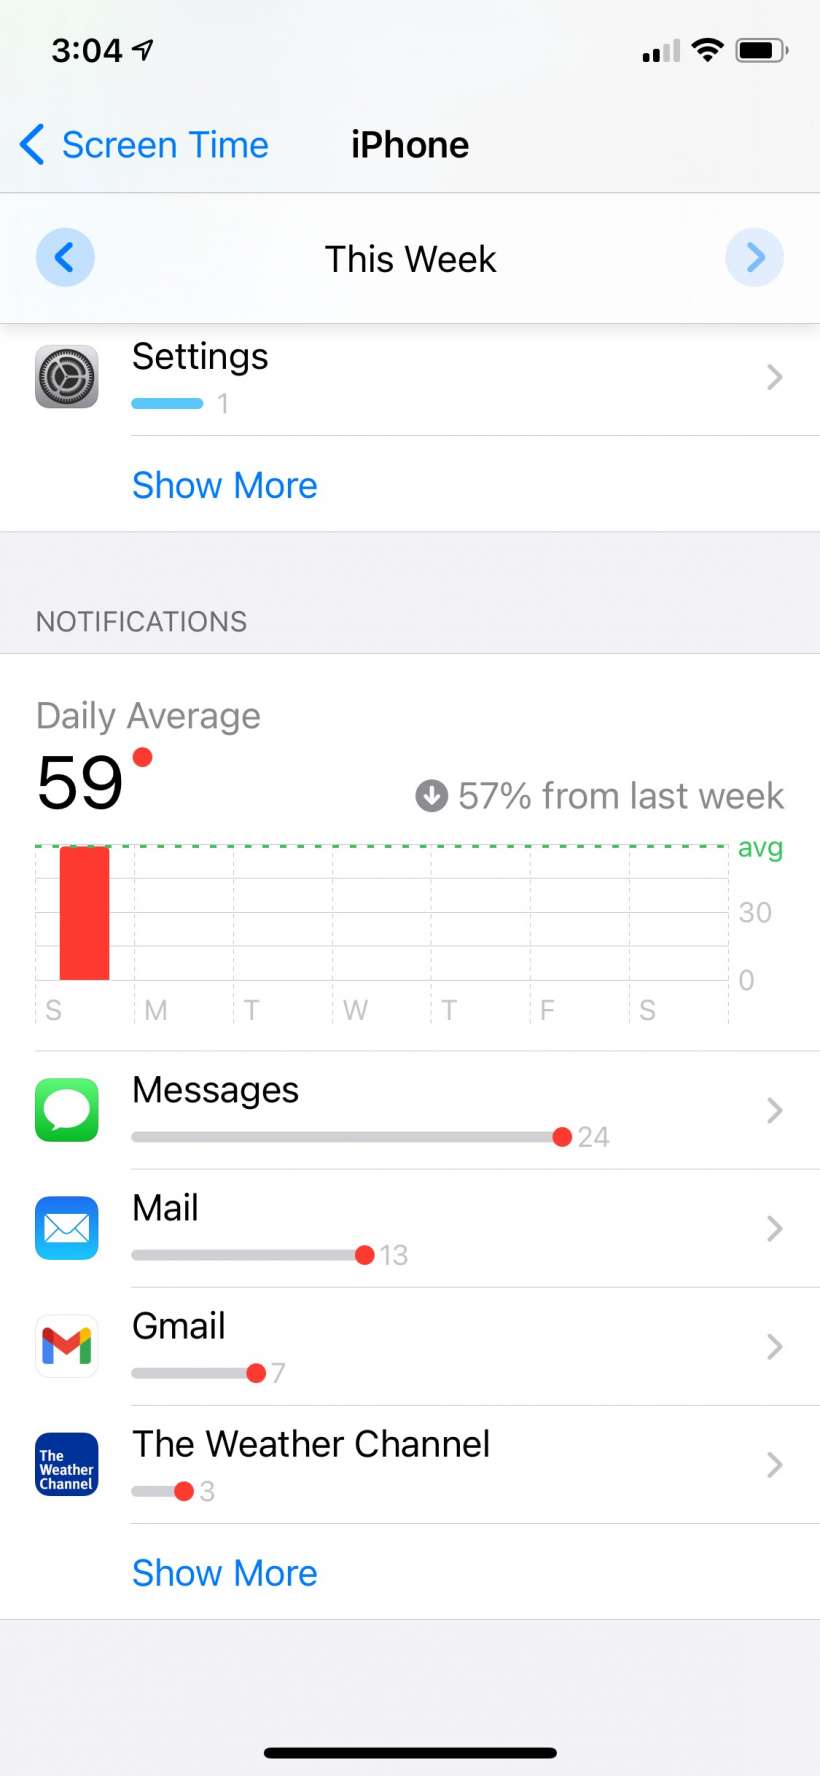 How to see which apps are sending the most notifications on iPhone and iPad.